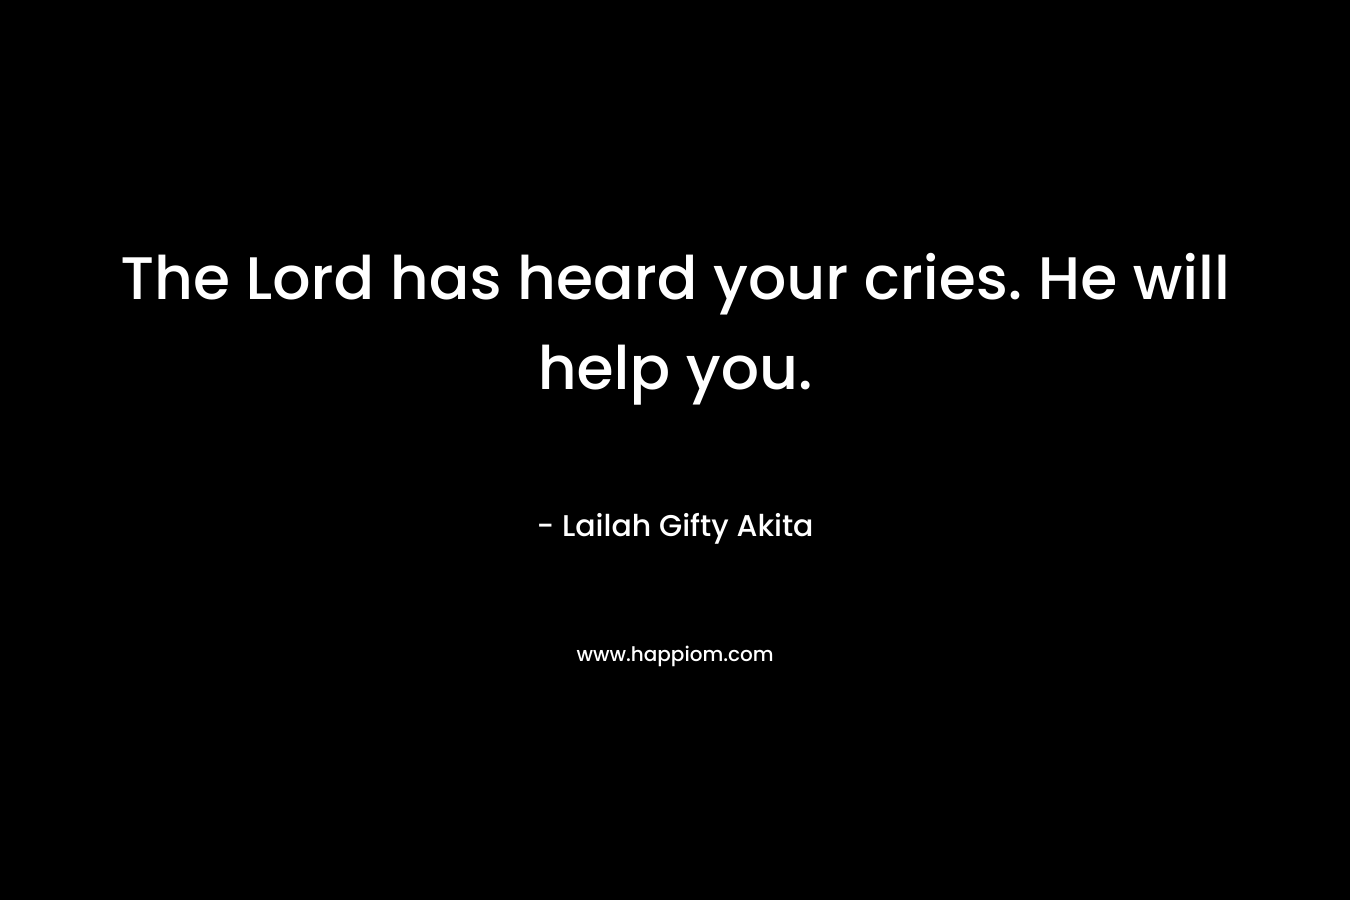 The Lord has heard your cries. He will help you.